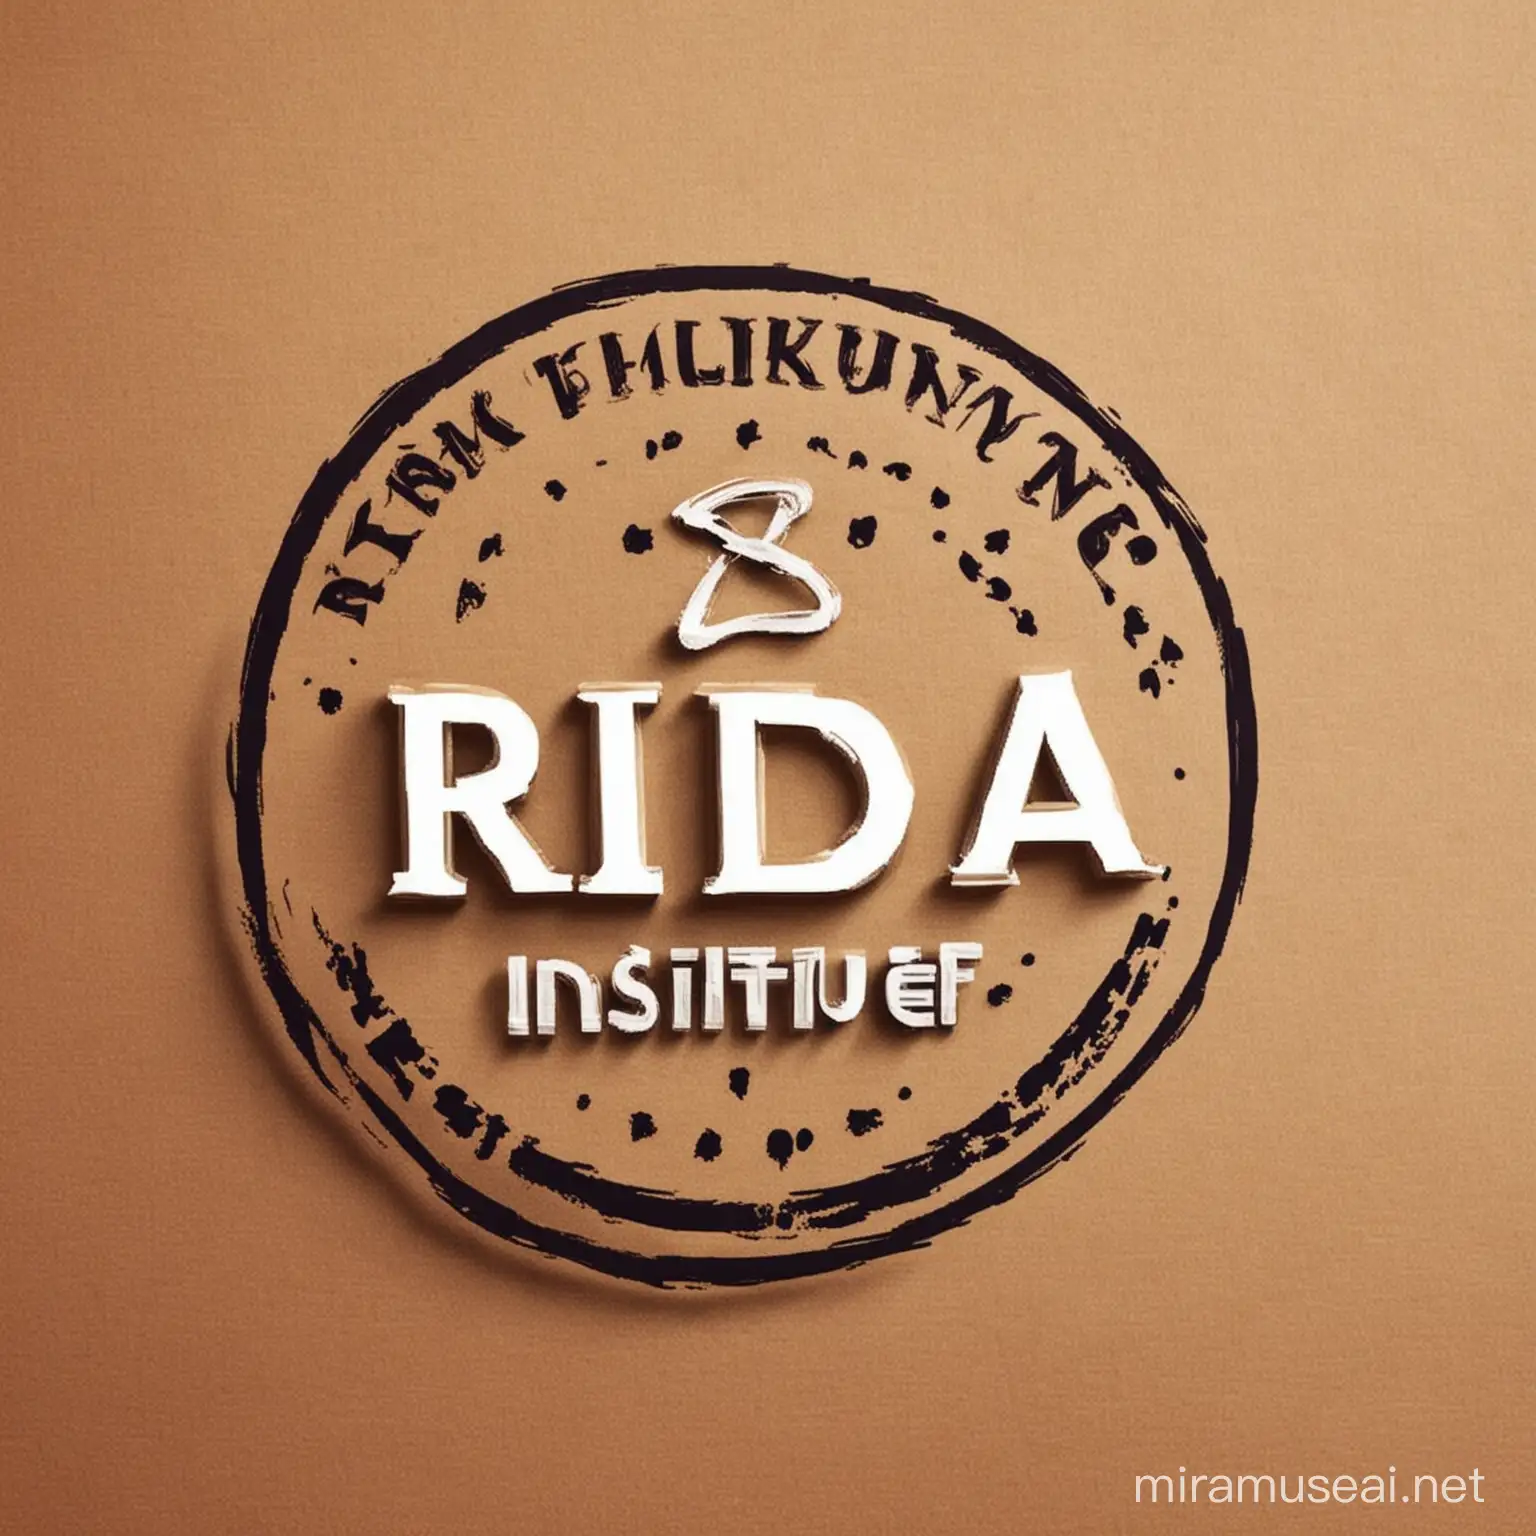 i want create logo of RIDA INSTITUTE which show admission is open
